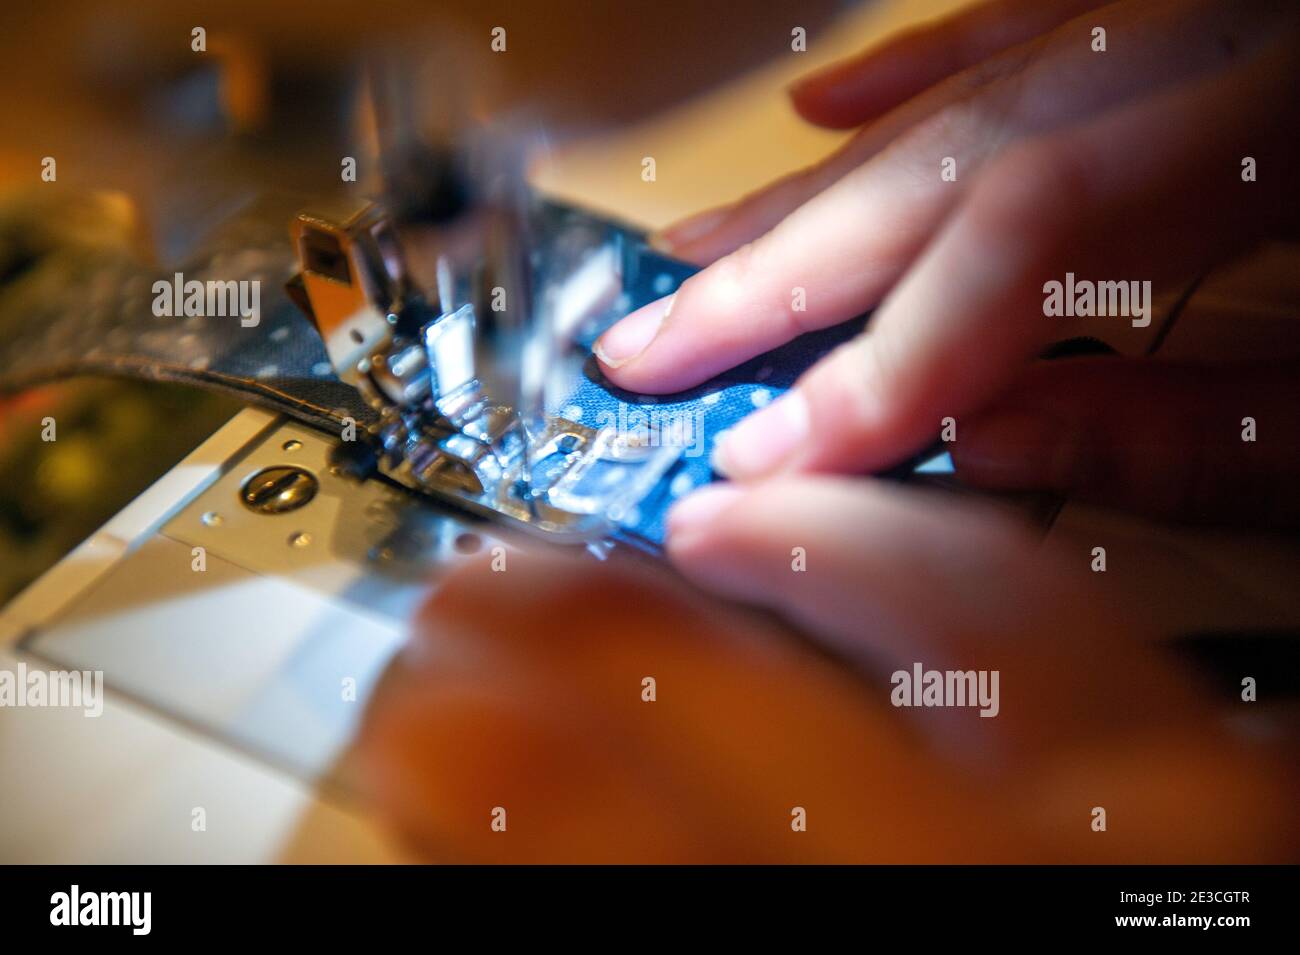 Close-up of a girl using a sewing machine Stock Photo